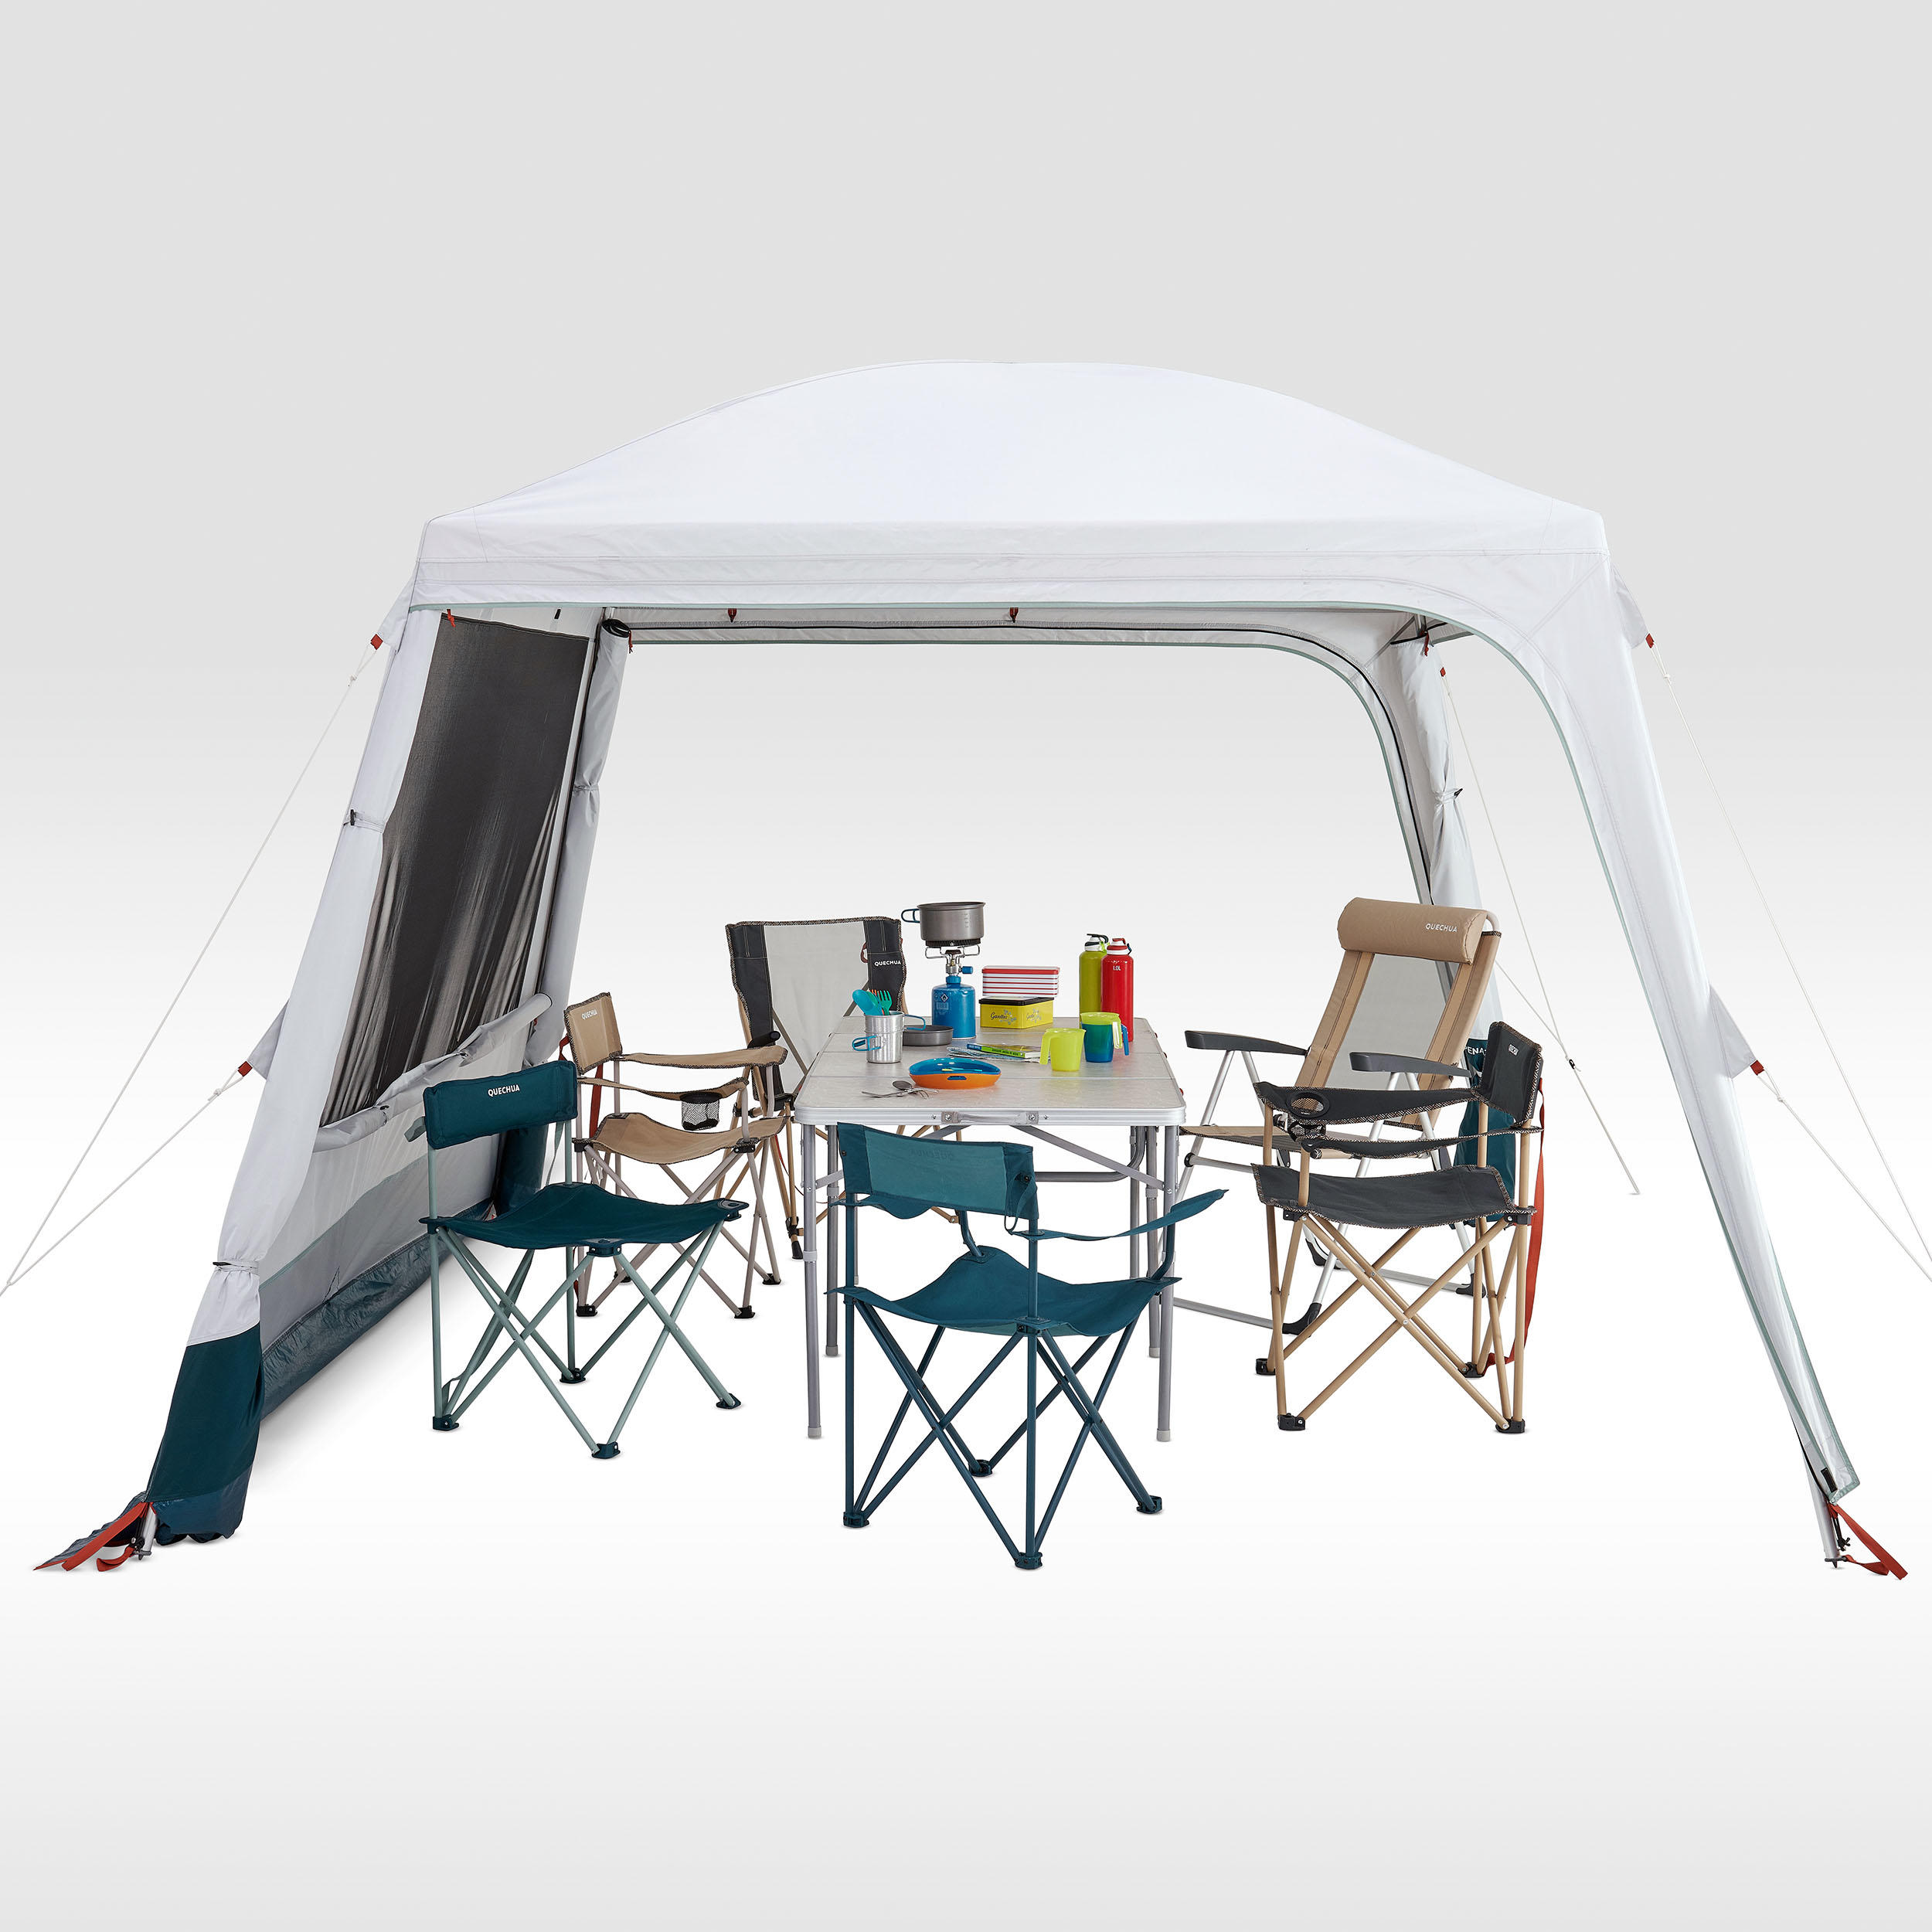 Decathlon Fresh Base, Living Area Camping Shelter, 10 Person